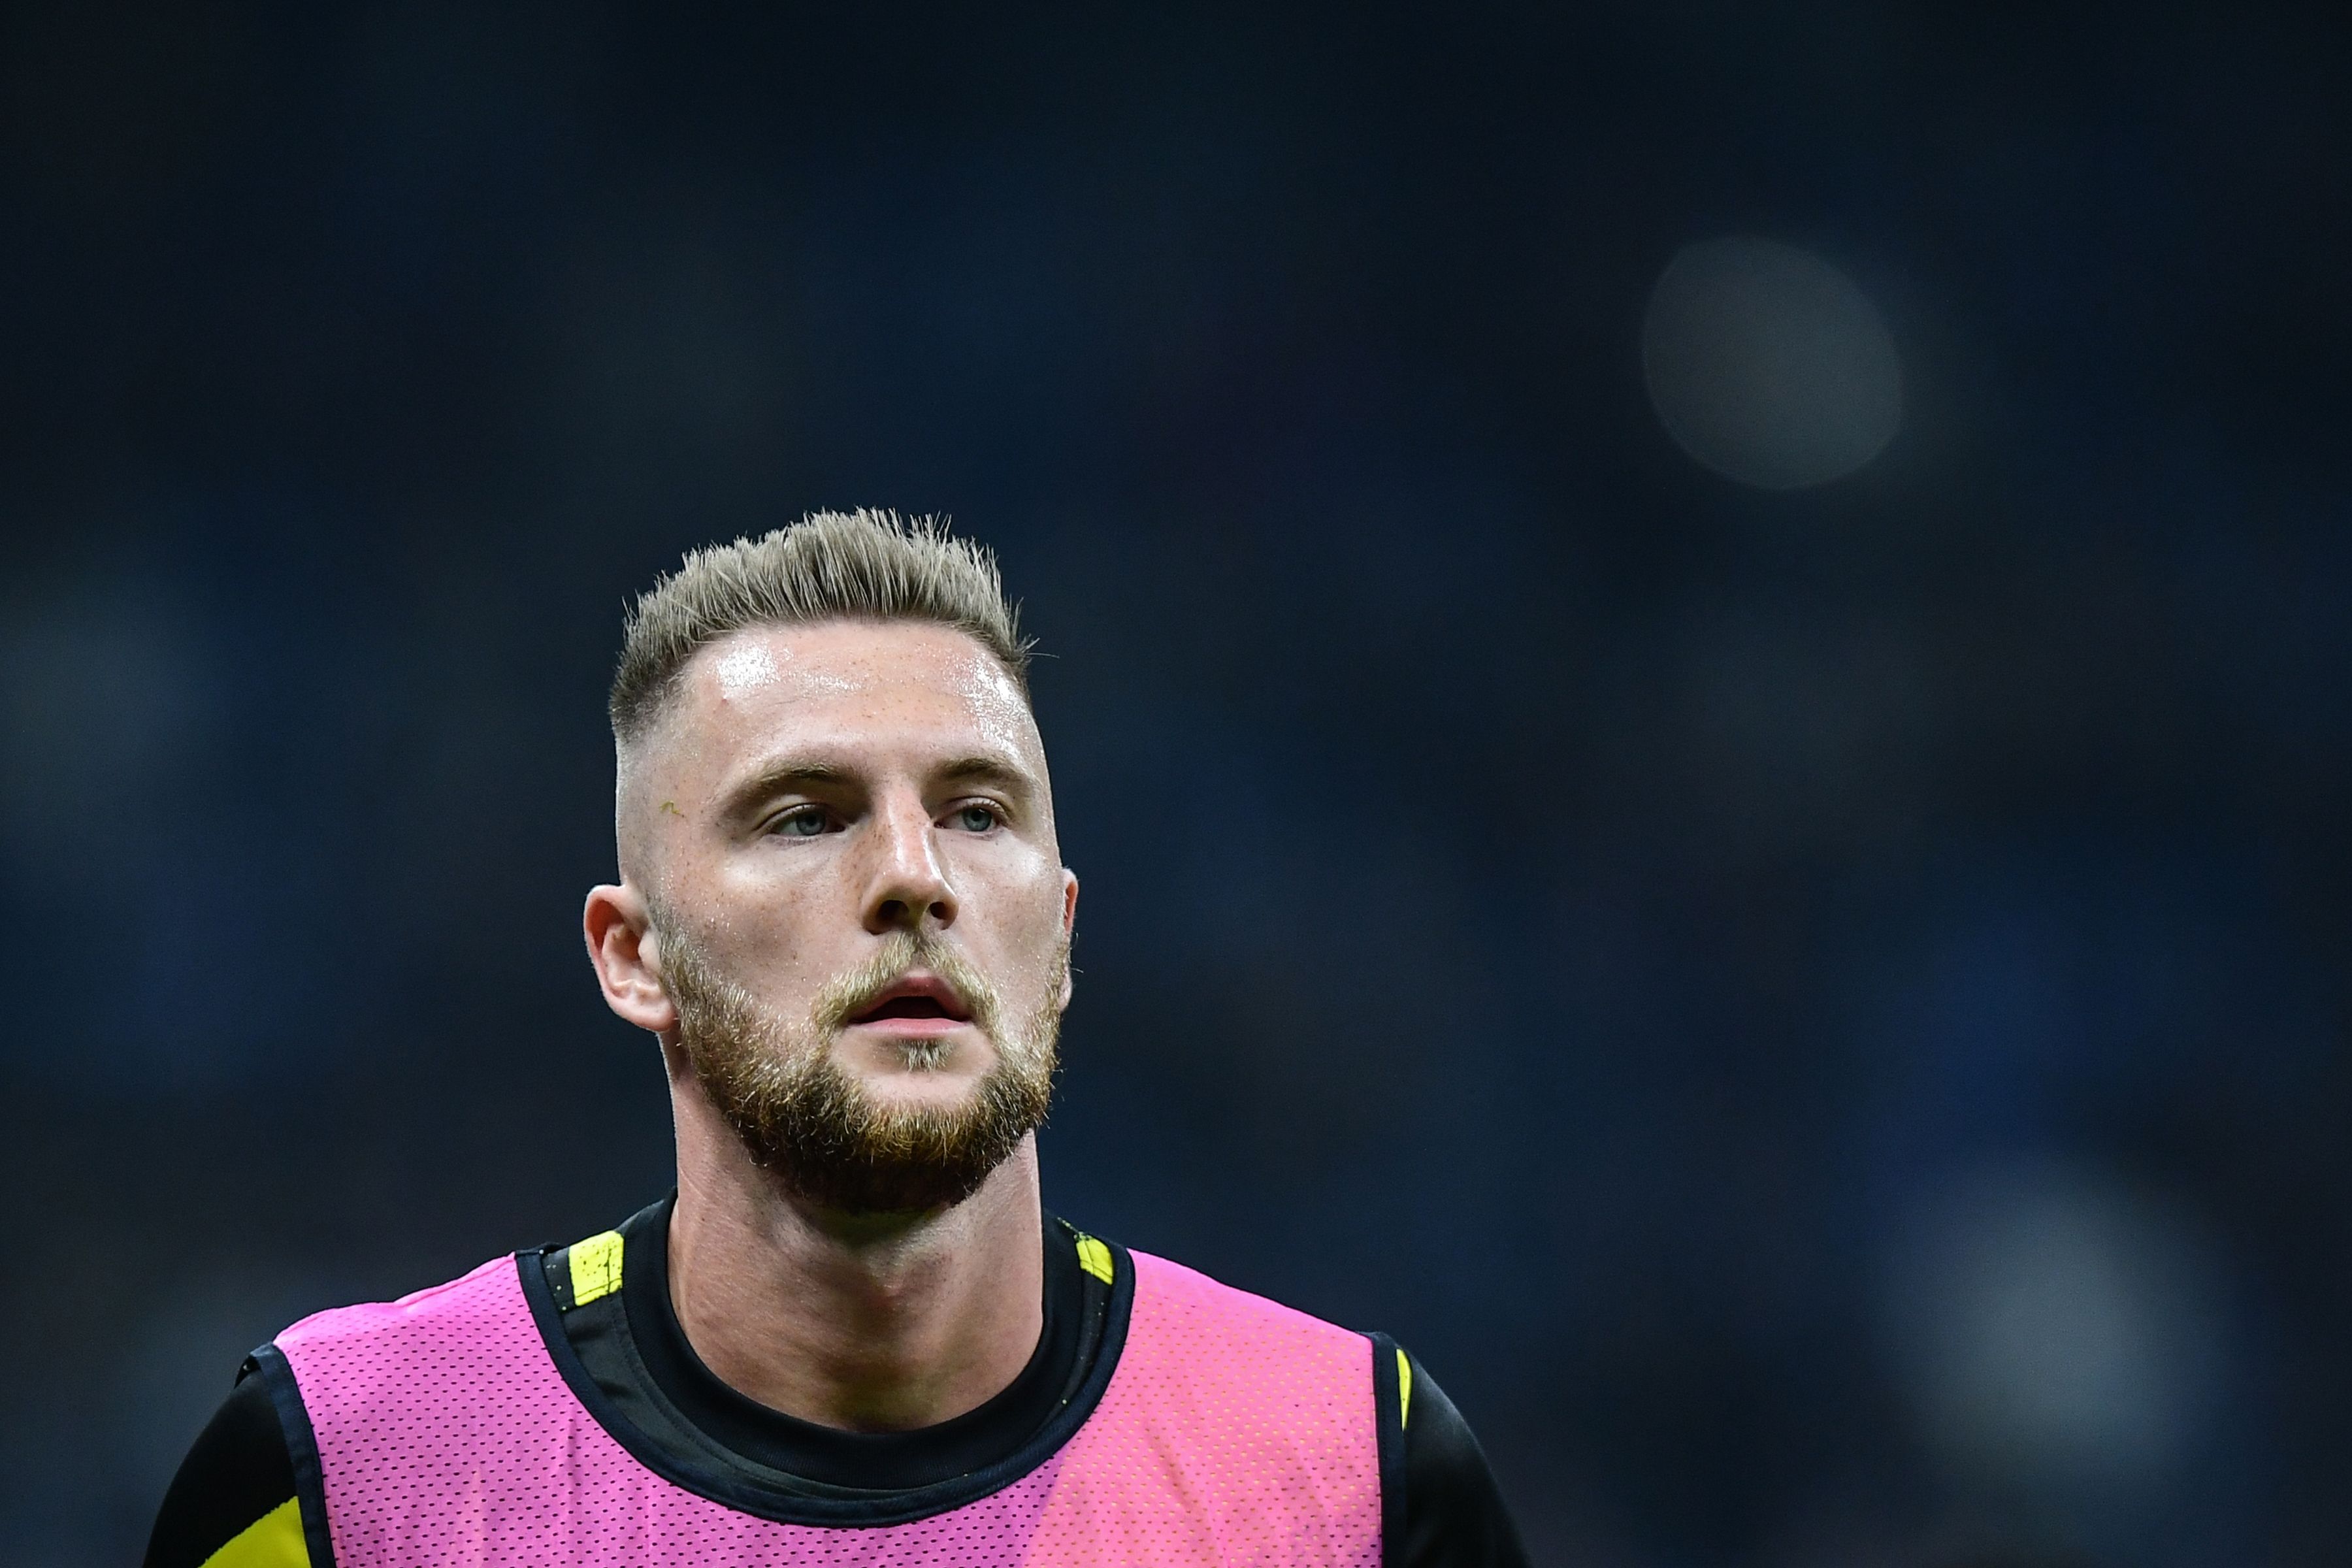 Inter Milan's Slovakian defender Milan Skriniar warms up prior to the UEFA Champions League Group F football match Inter Milan vs Borussia Dortmund on October 23, 2019 at the San Siro stadium in Milan. (Photo by Miguel MEDINA / AFP) (Photo by MIGUEL MEDINA/AFP via Getty Images)